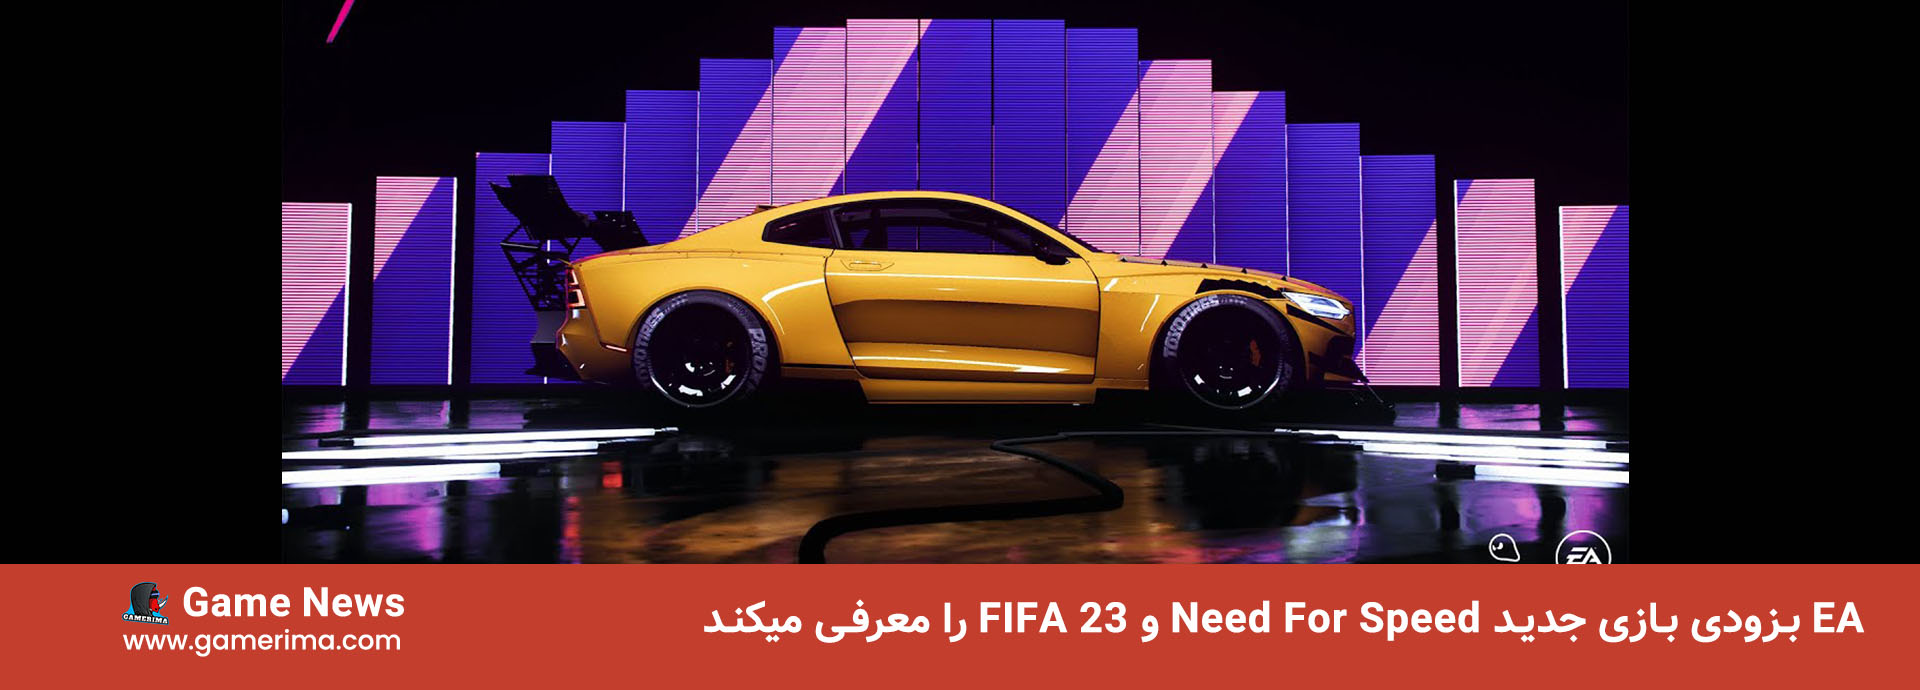 FIFA 23 And NFS Announcement